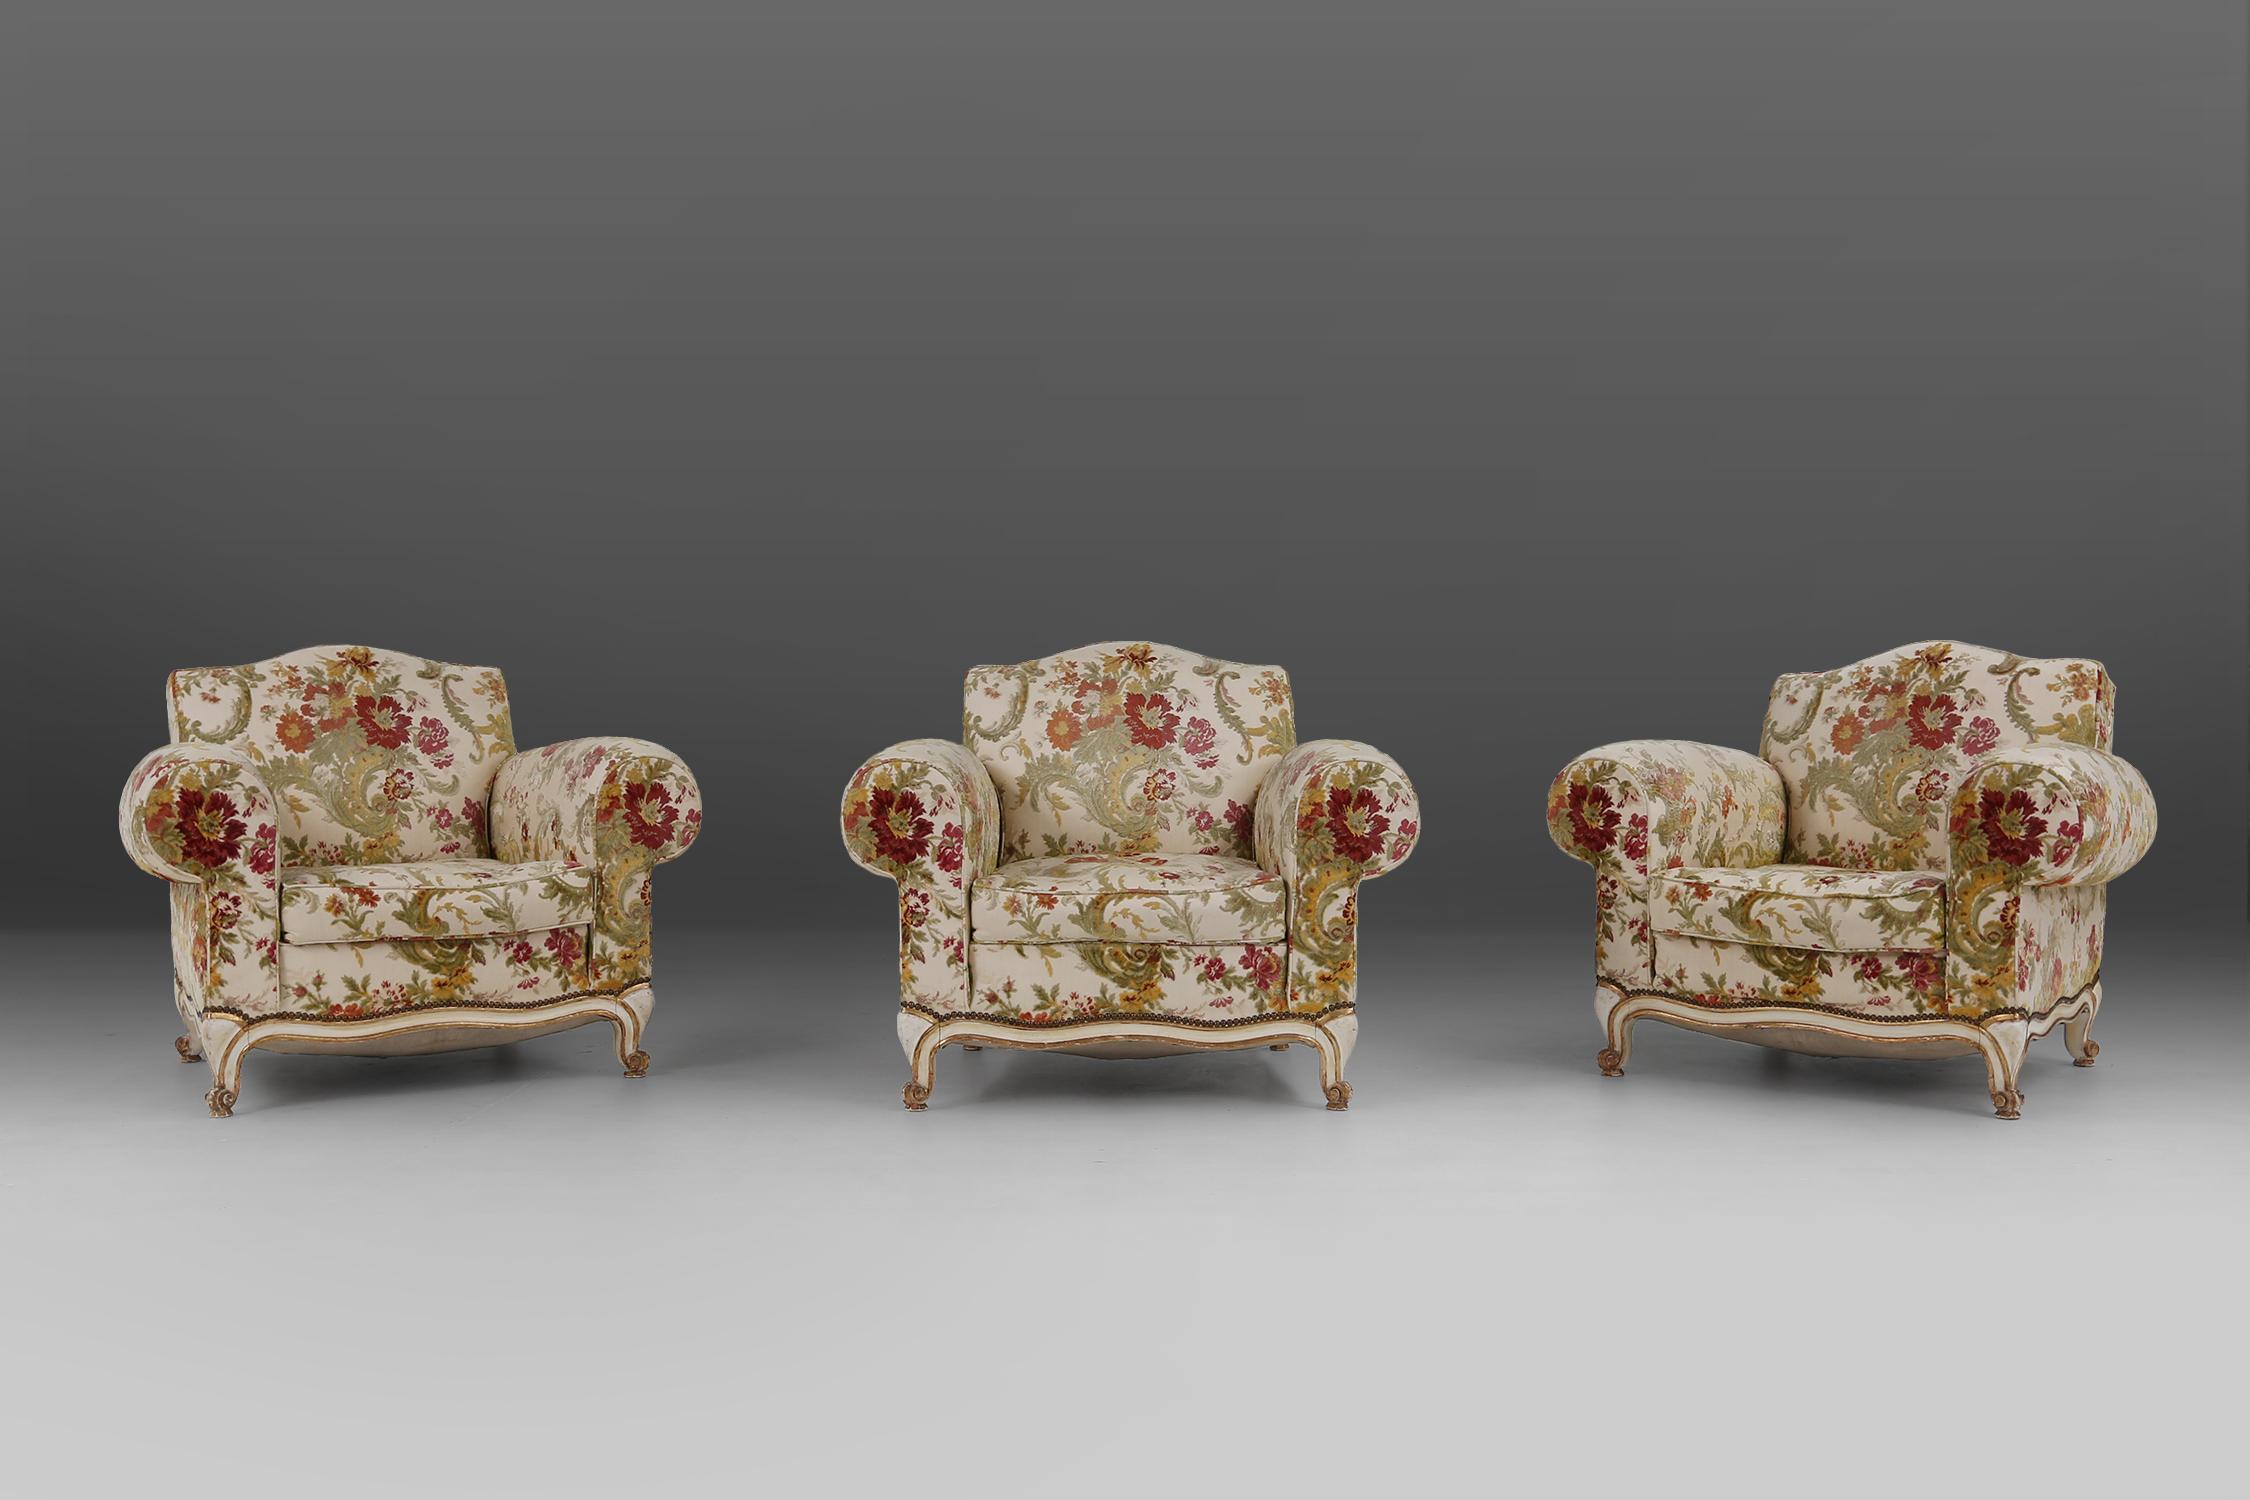 Set of tree french armchairs that have a elegant curve of the backrest and the large, bulky armrests that provide the sitter to lay down their arms comfortably. This design is ably employed as either the heart of a decor or its focal point thanks to